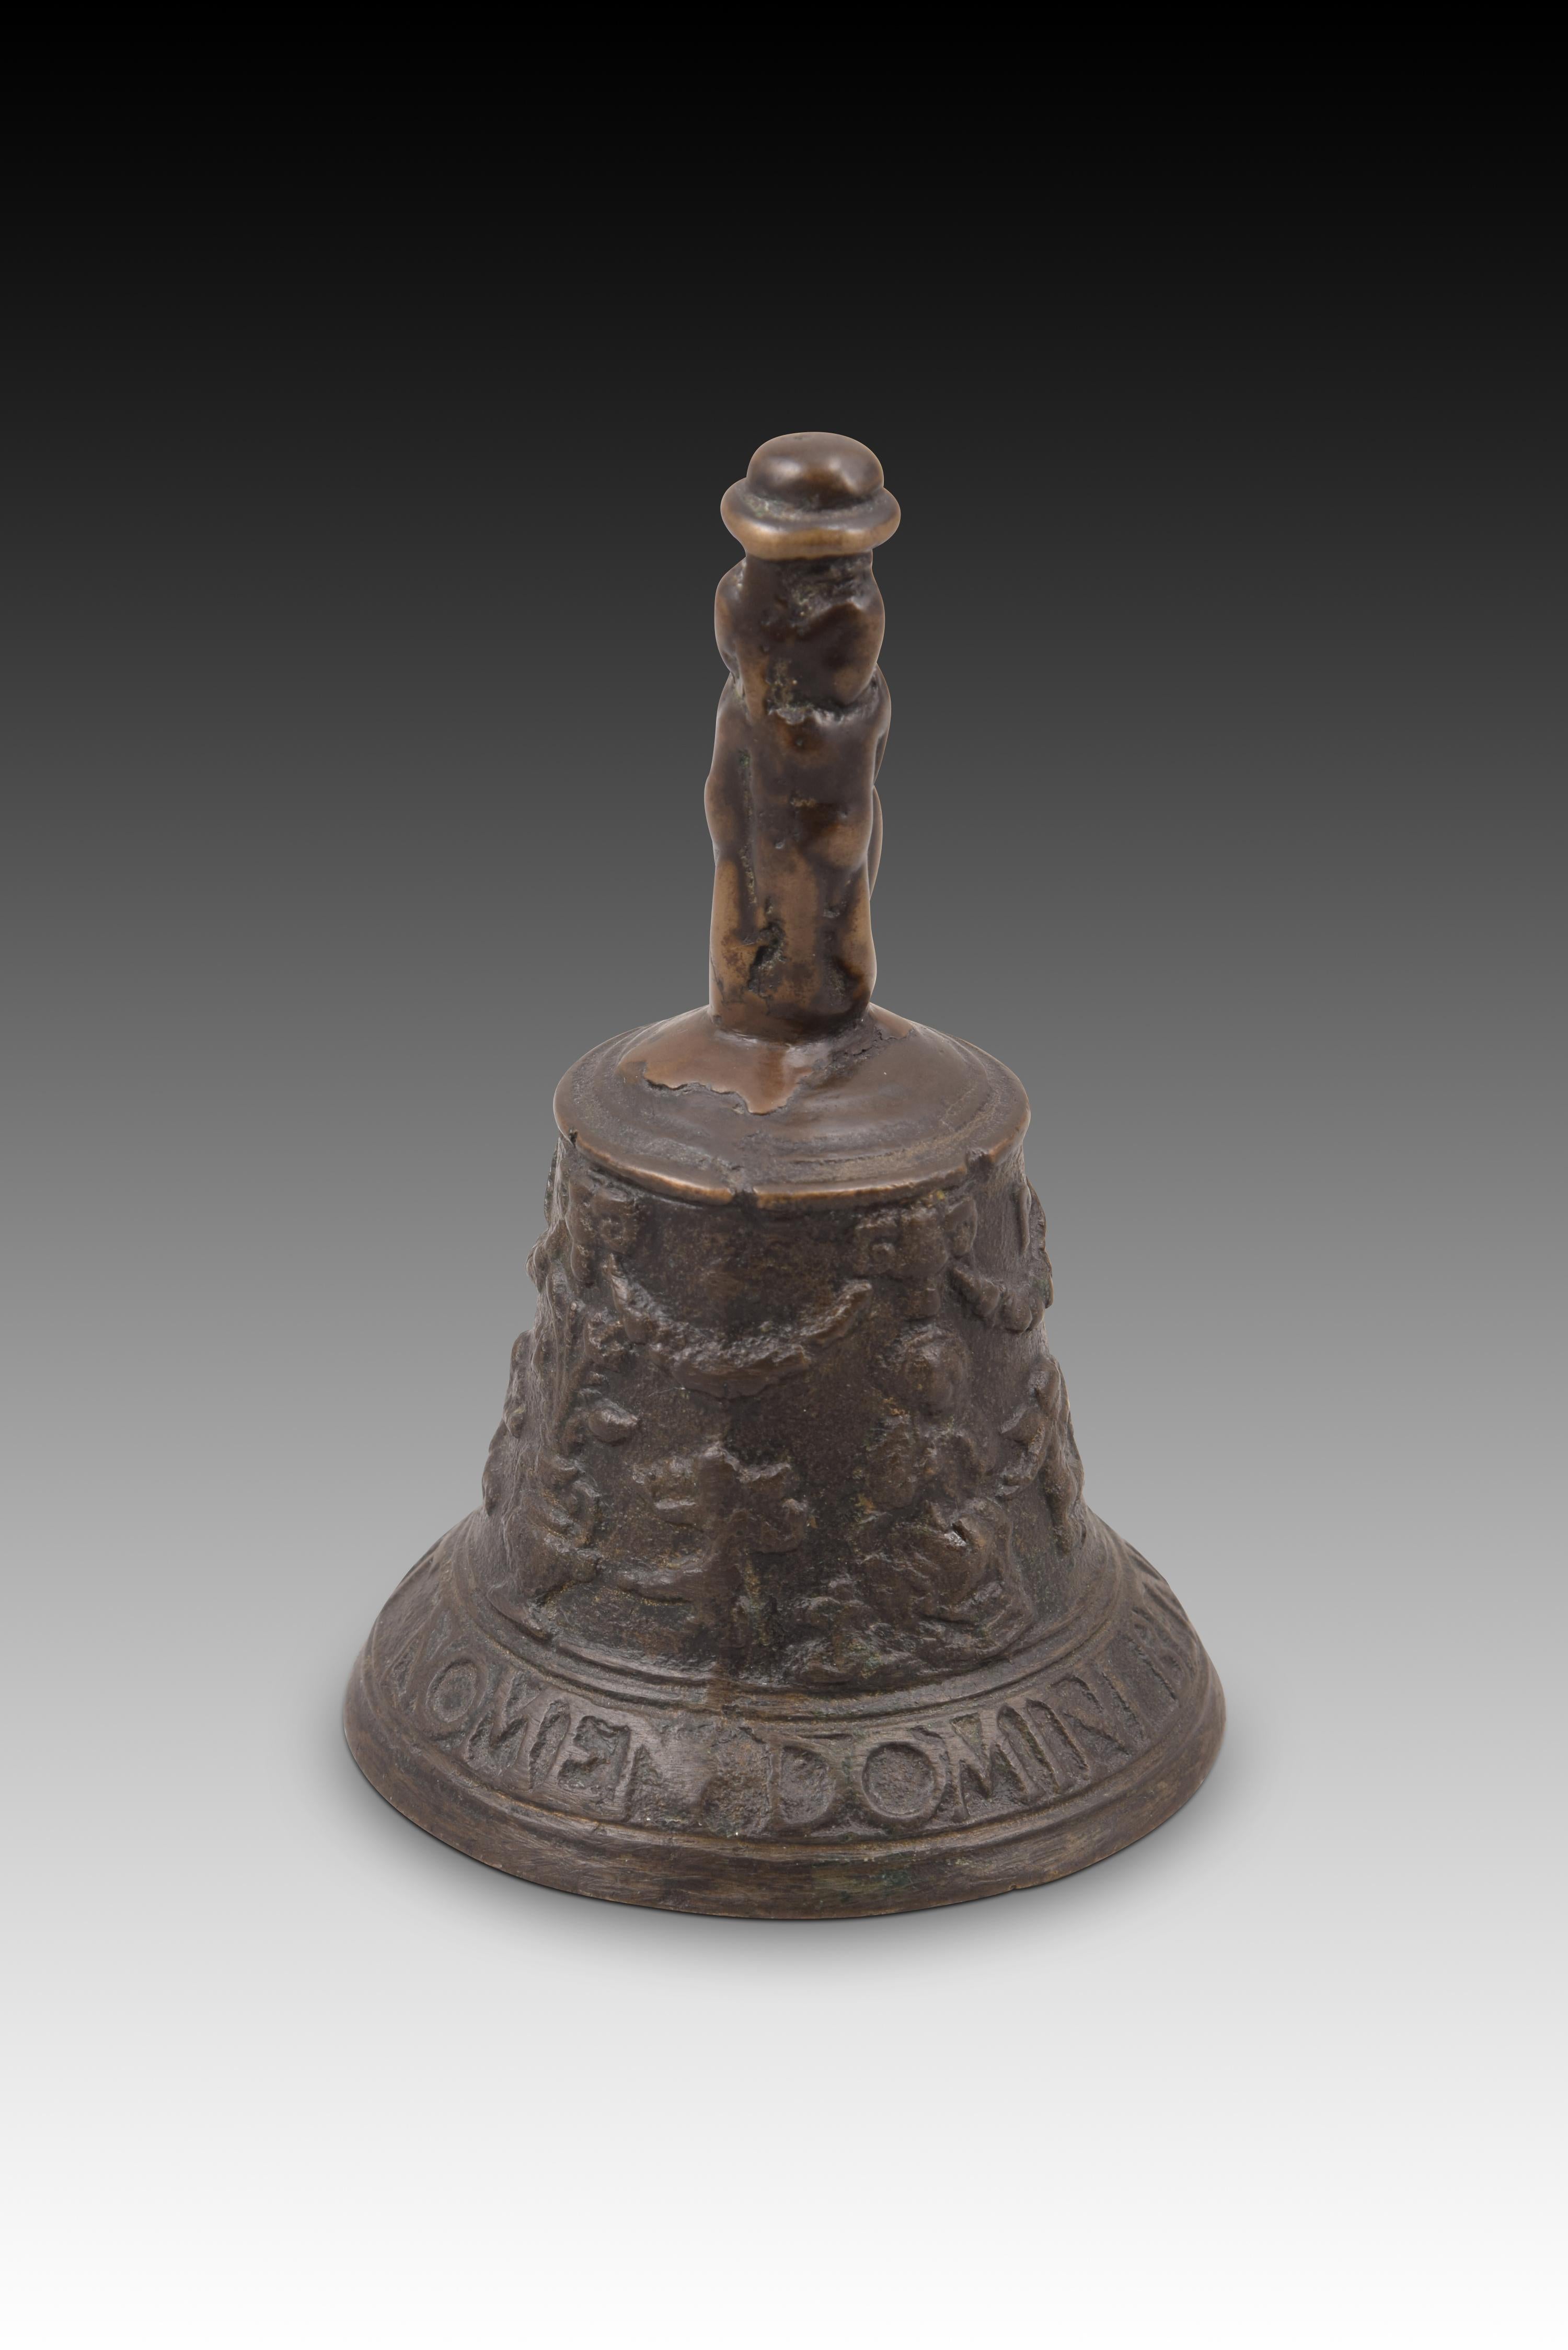 Flemish bell, “from Mechelen”. Bronze. Century XVI. 
Hand bell with clapper made of bronze and decorated on the outside with a slight relief. The base presents, between bands, an inscription in capital letters and in Latin (“Sit nomen Domini